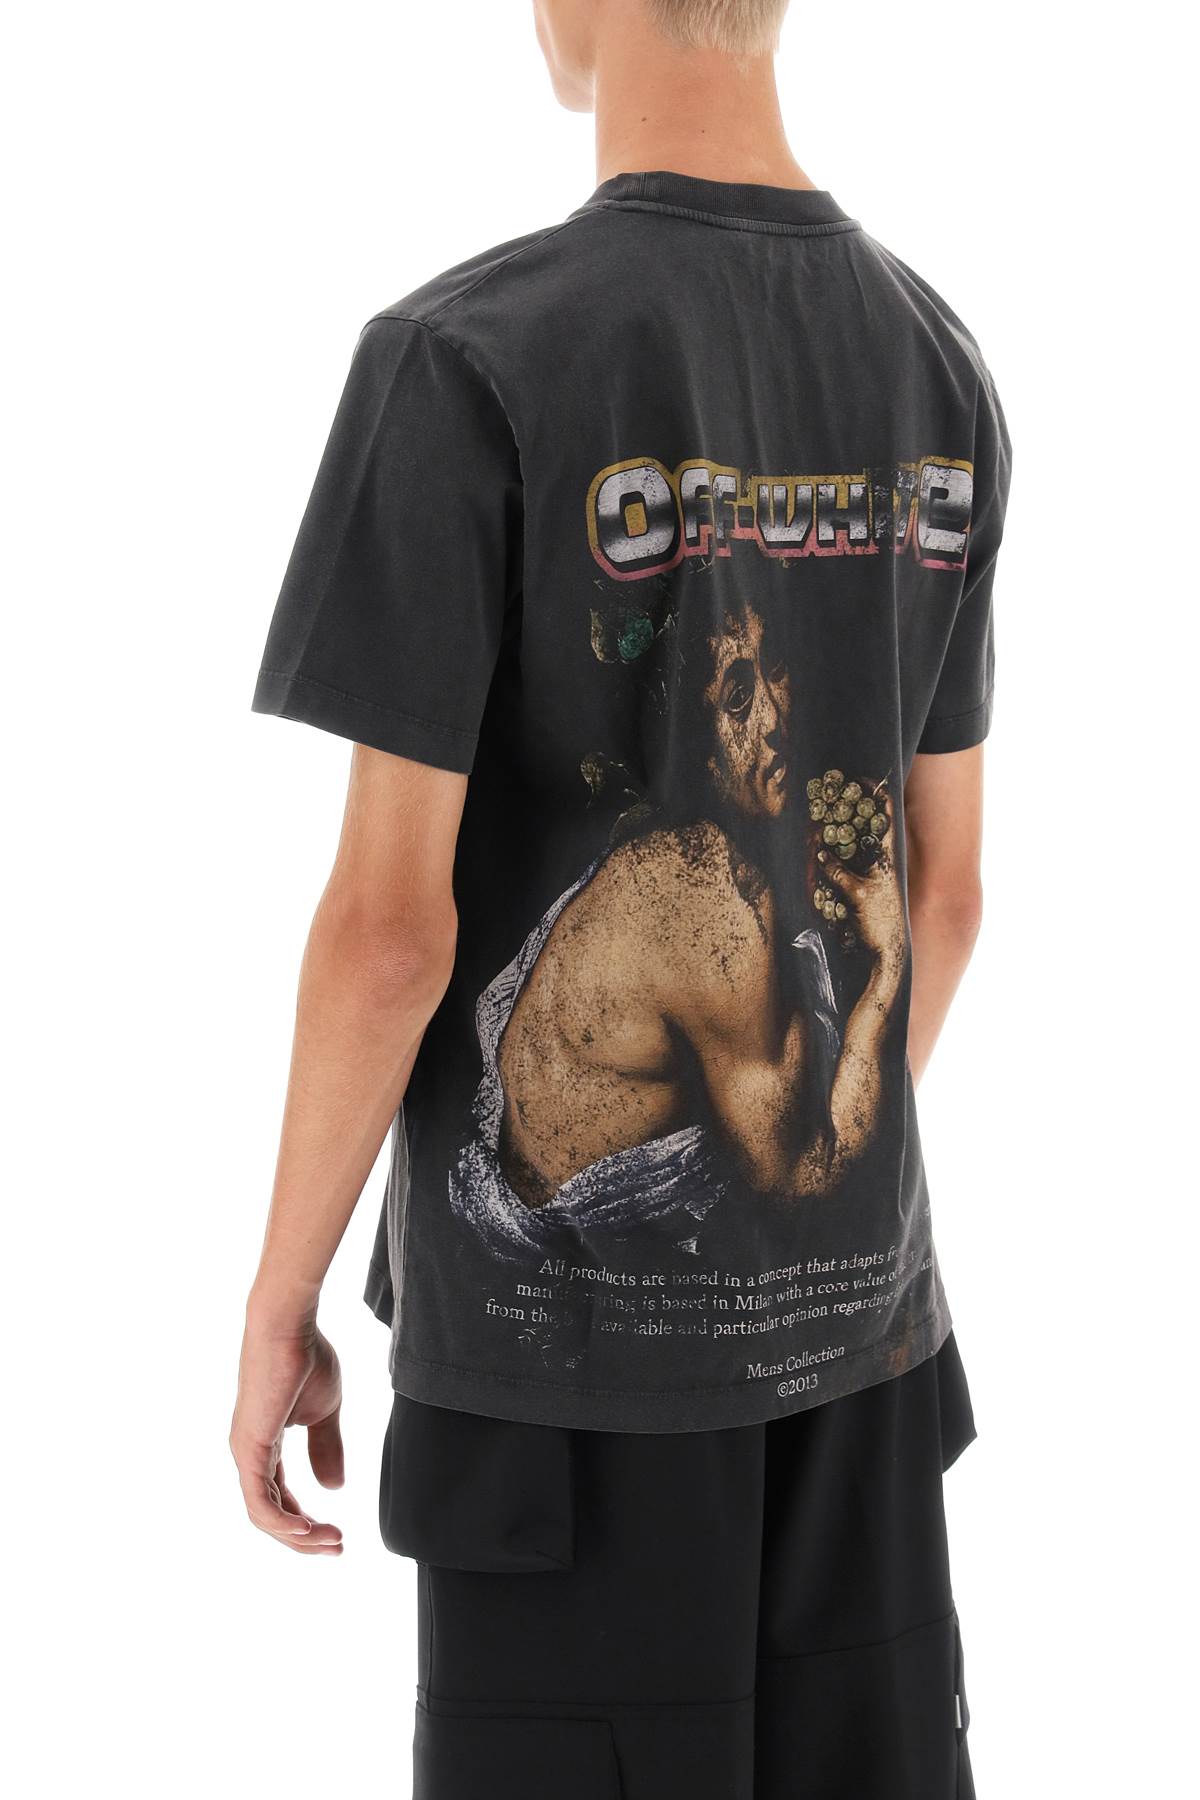 Off-White Off-white t-shirt with back bacchus print